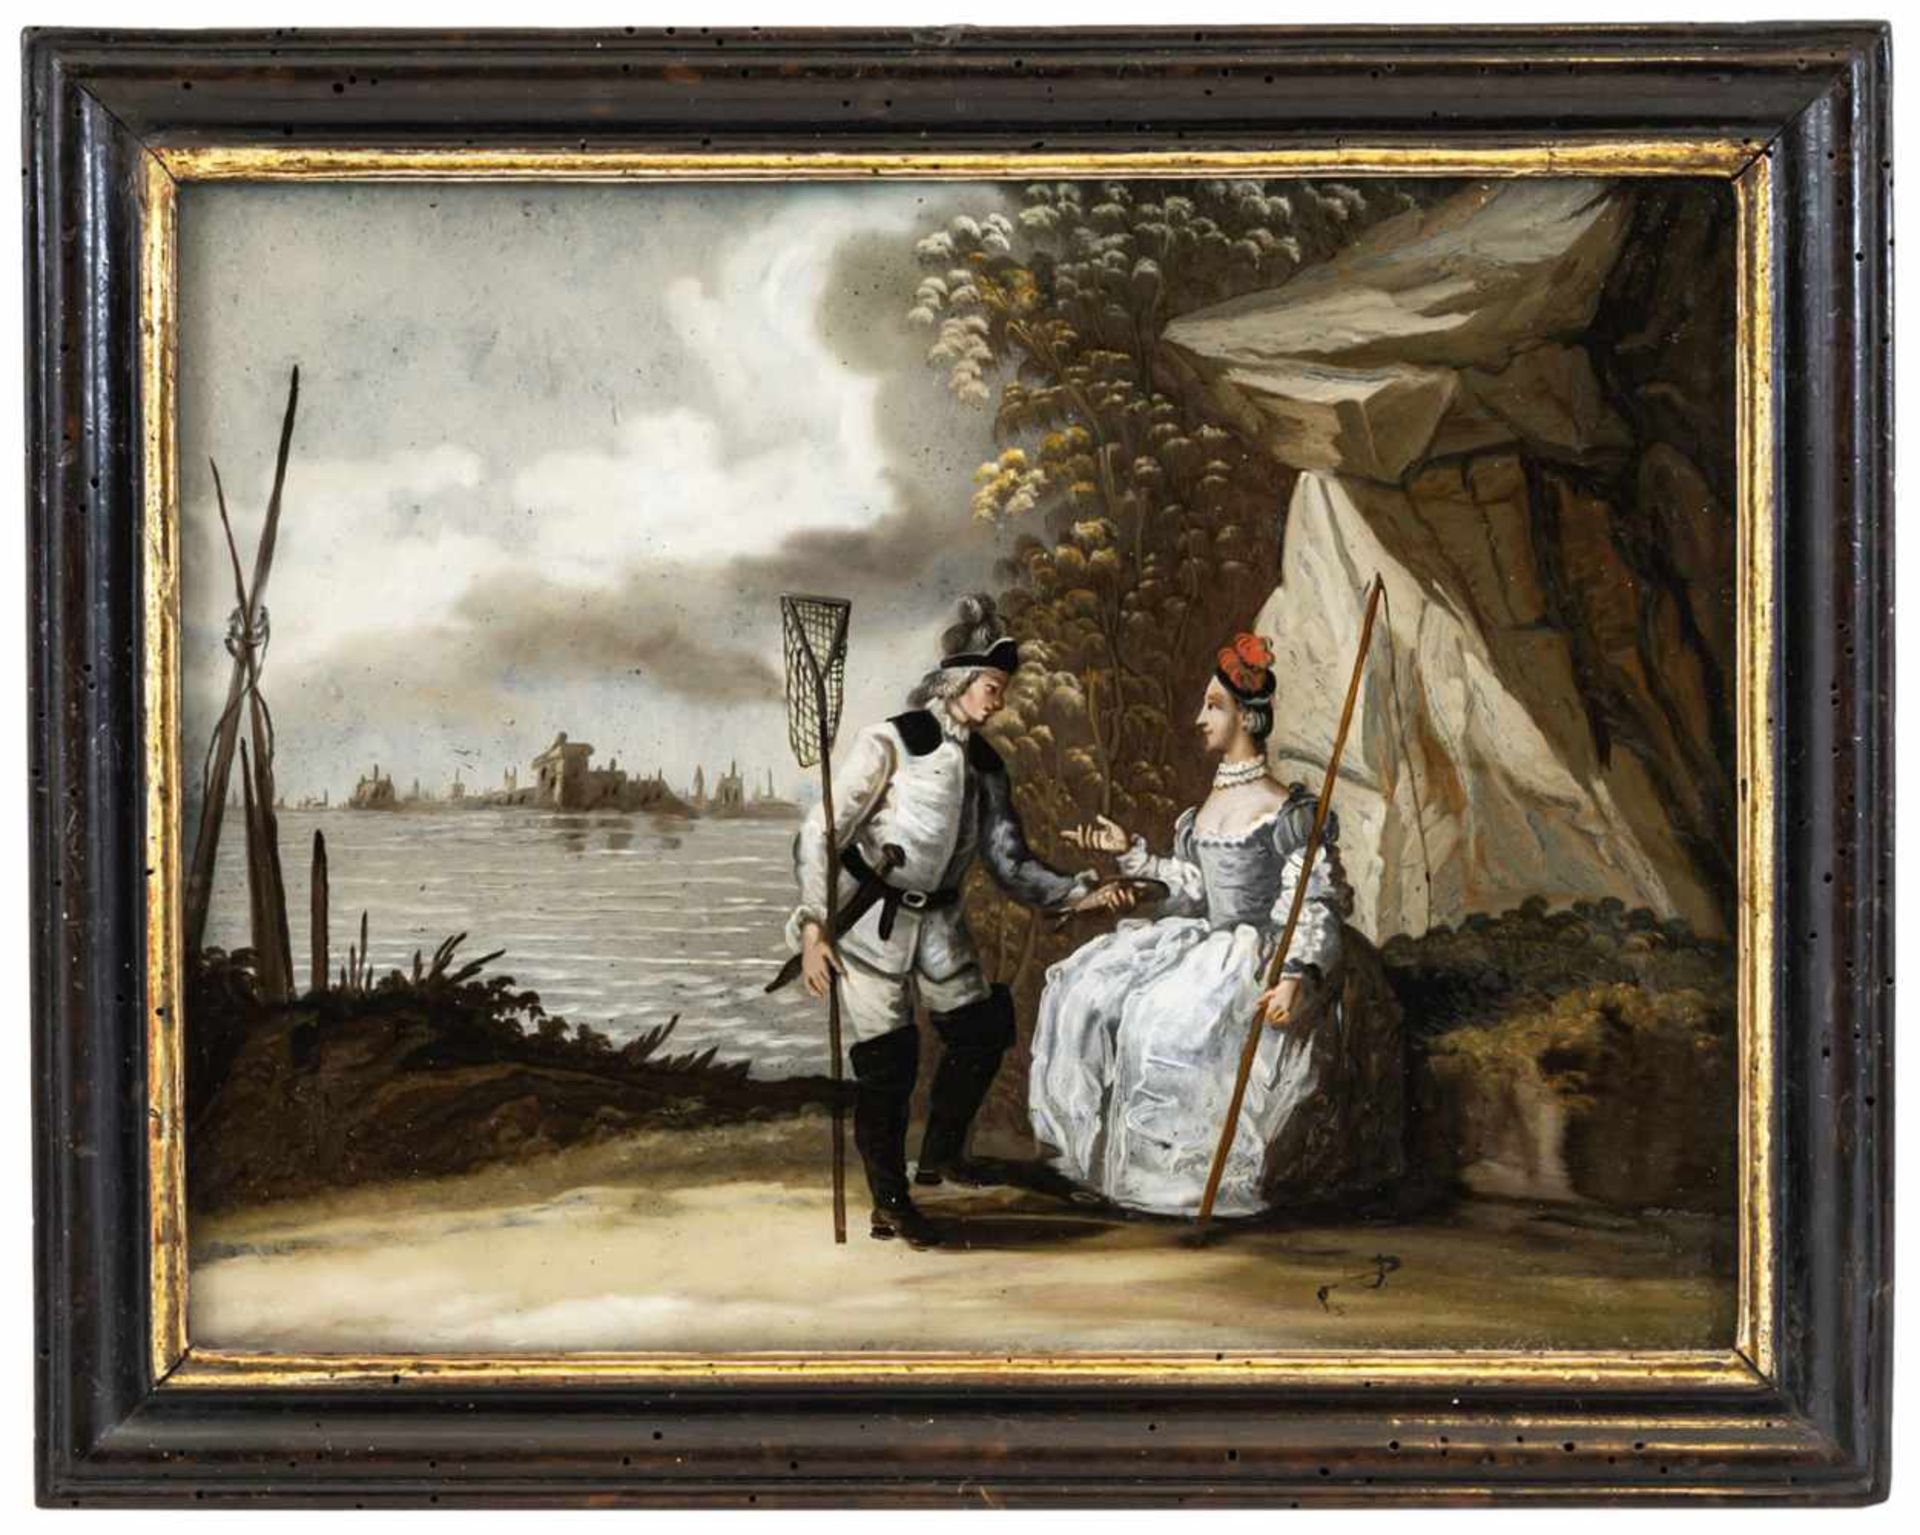 A GLASS PAINTING ON REVERSE DEPICTING THE ELEMENT WATER, Augsburg, c. 1750. A fisher's couple in - Bild 2 aus 2